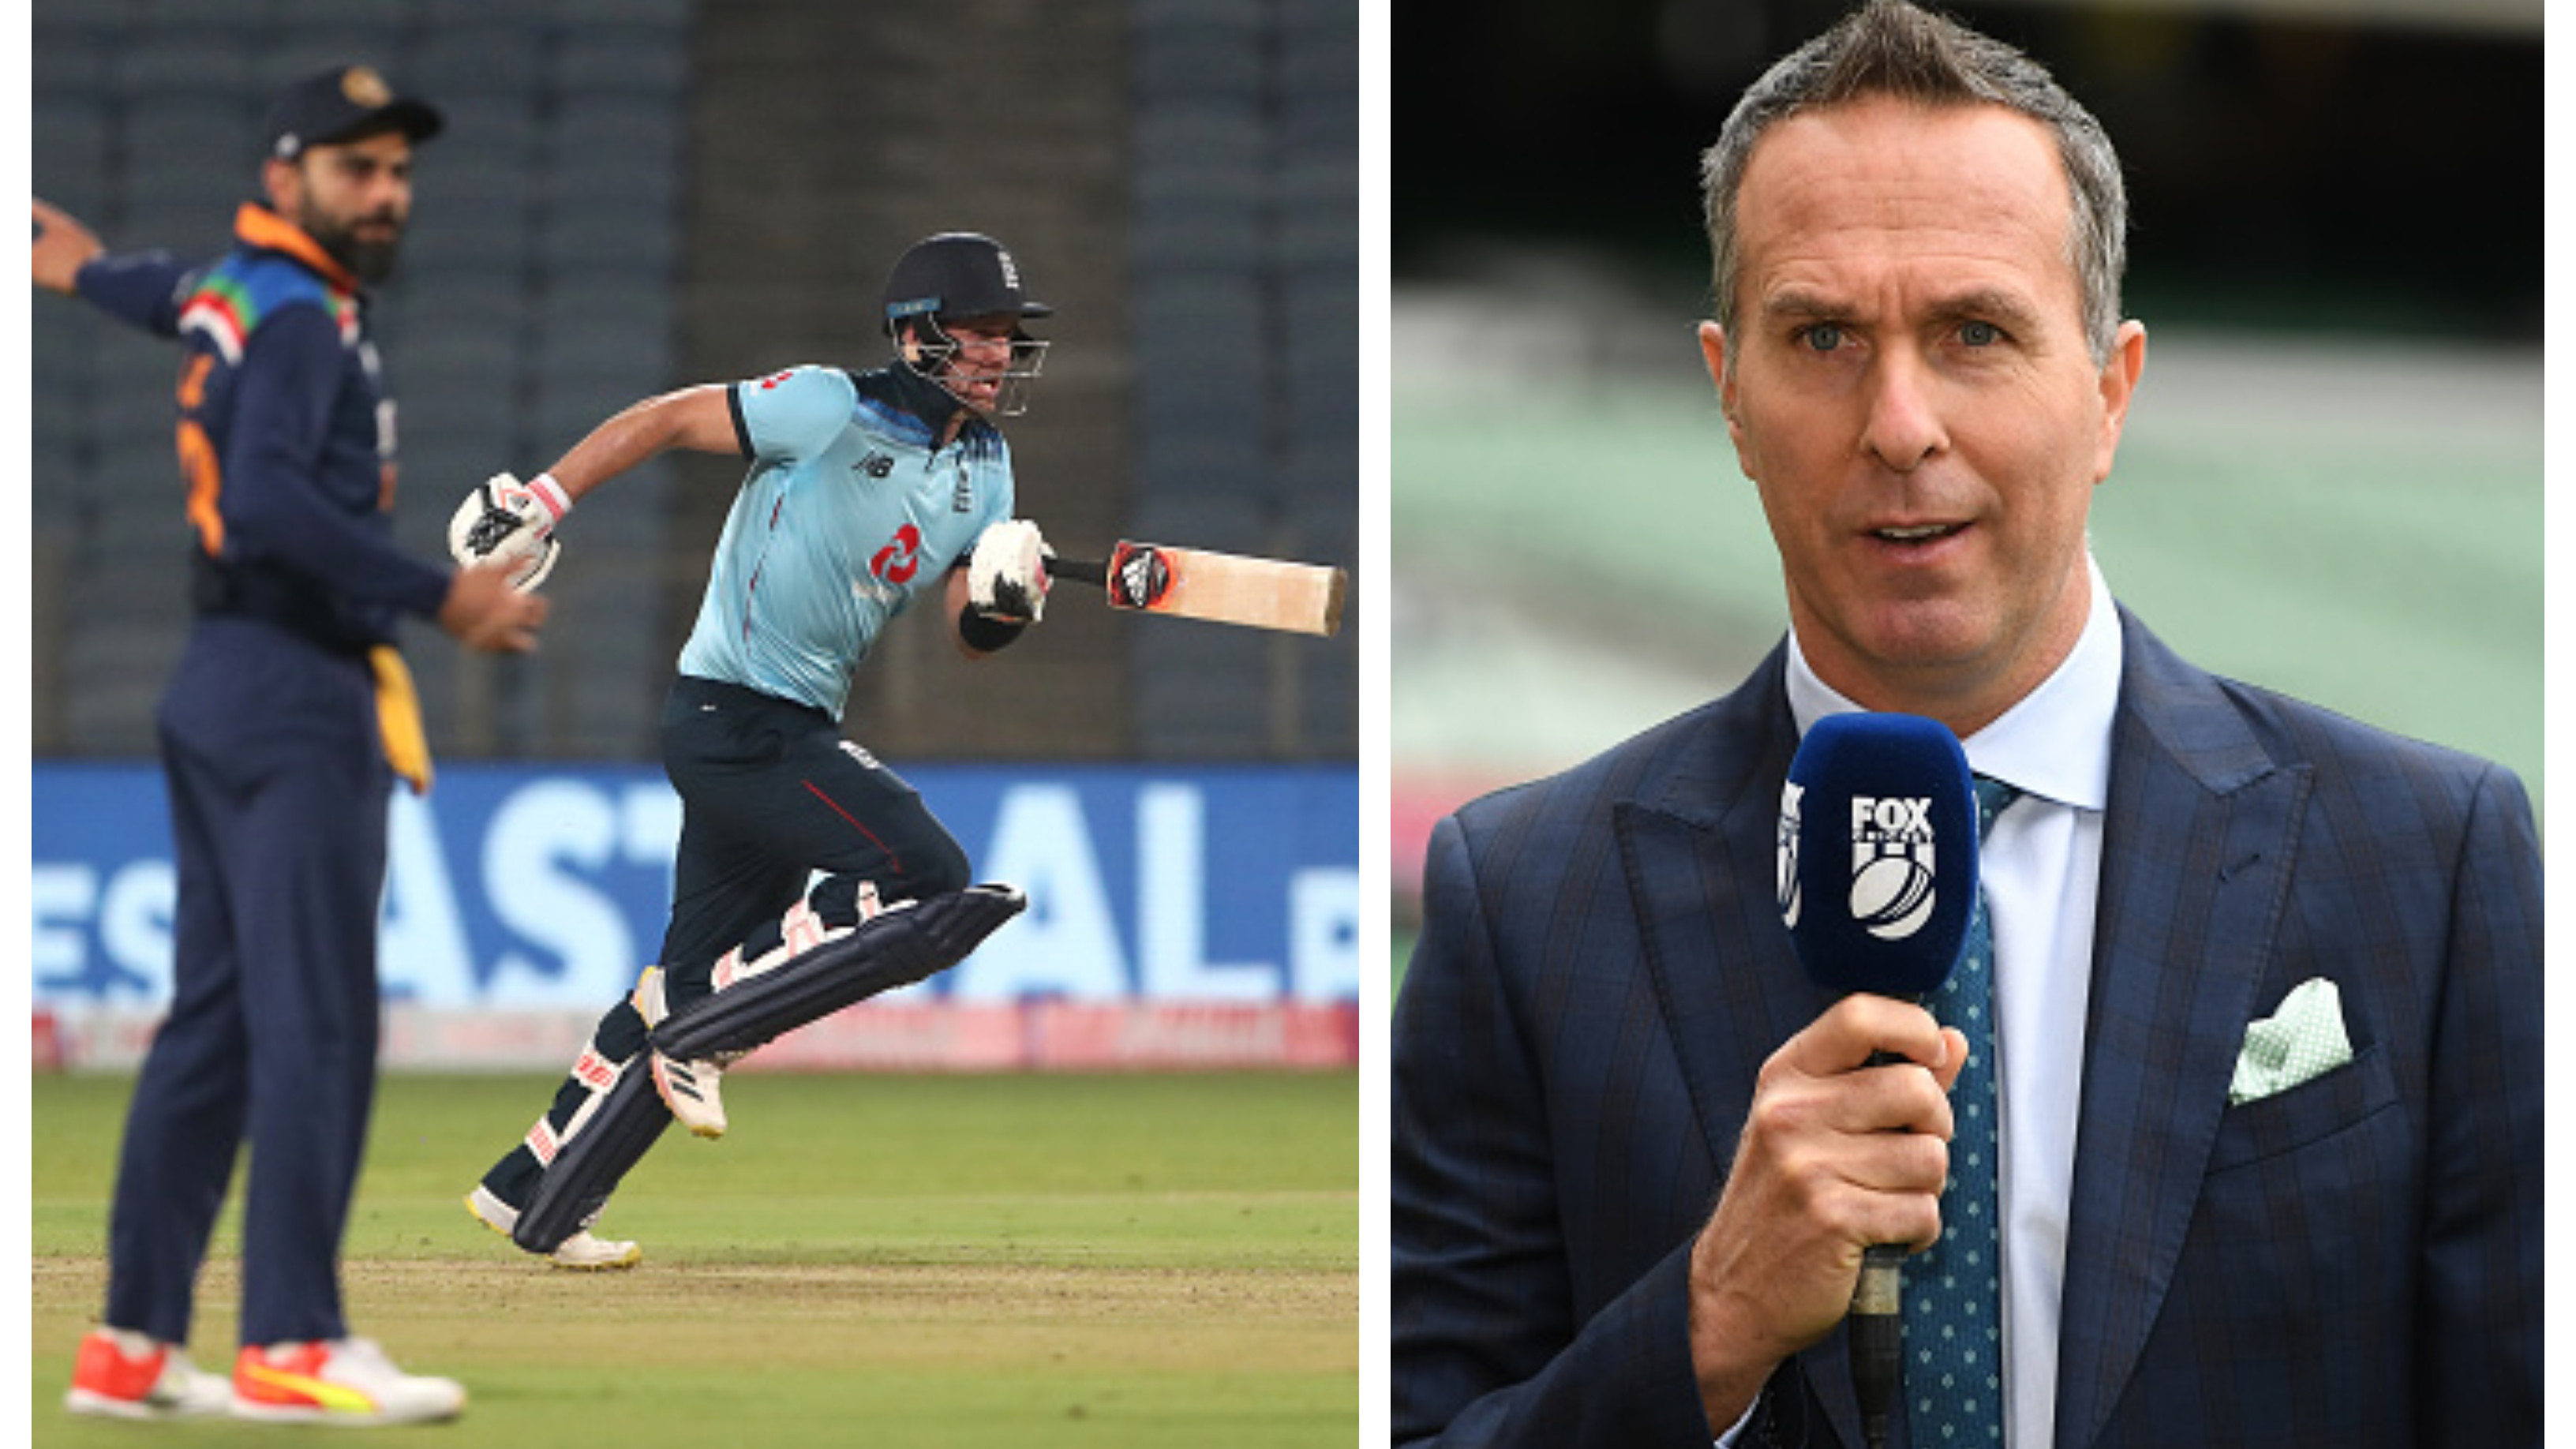 Michael Vaughan suggests administrators to have ODI format reserved only for World Cups